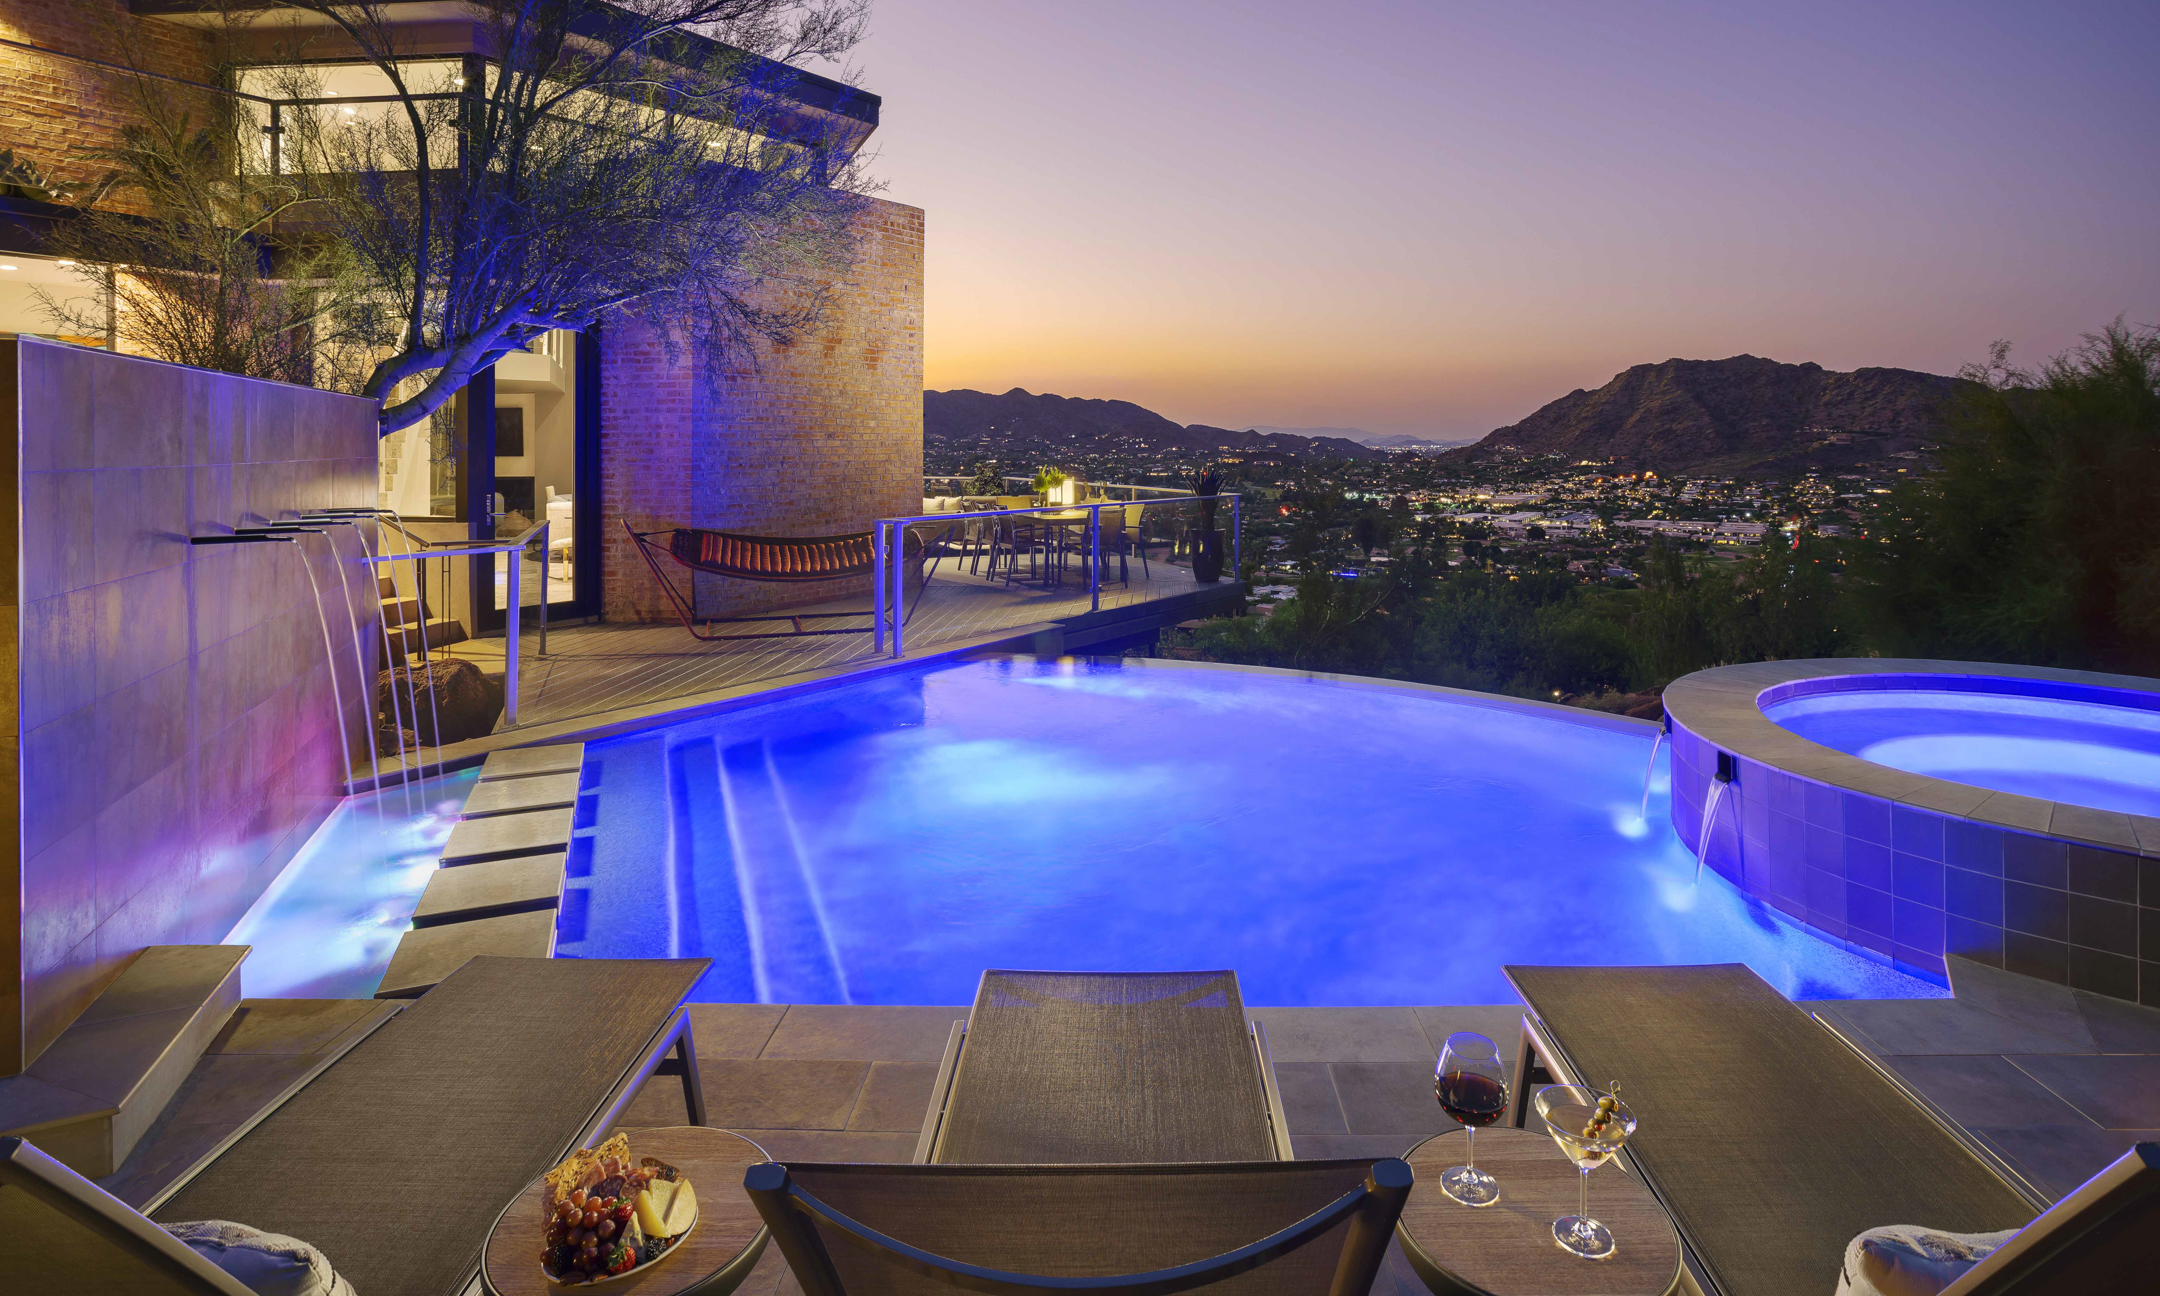 Three lounge chairs overlooking pool with water feature and hot tub with views of surrounding valley.